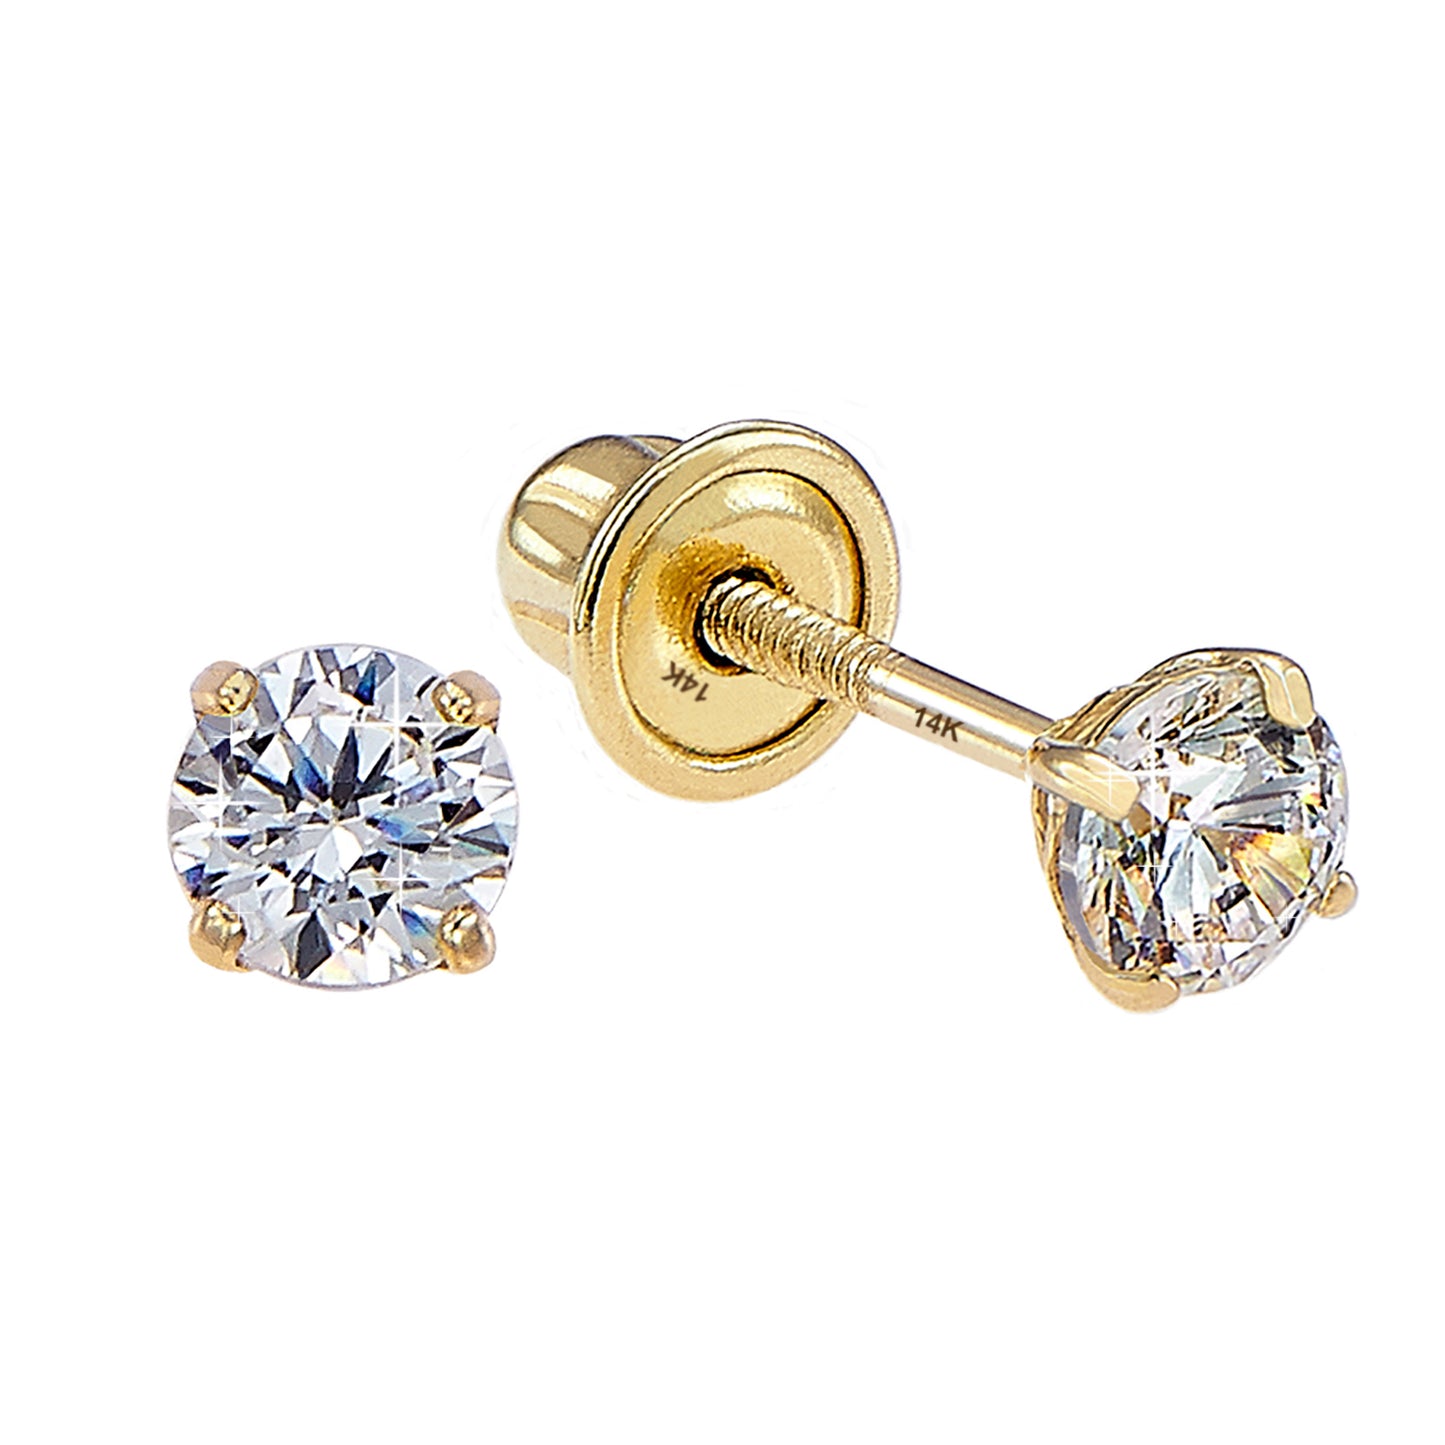 3mm Classic Round Studs, Baby/Children's Earrings, Screw Back - 14K Gold